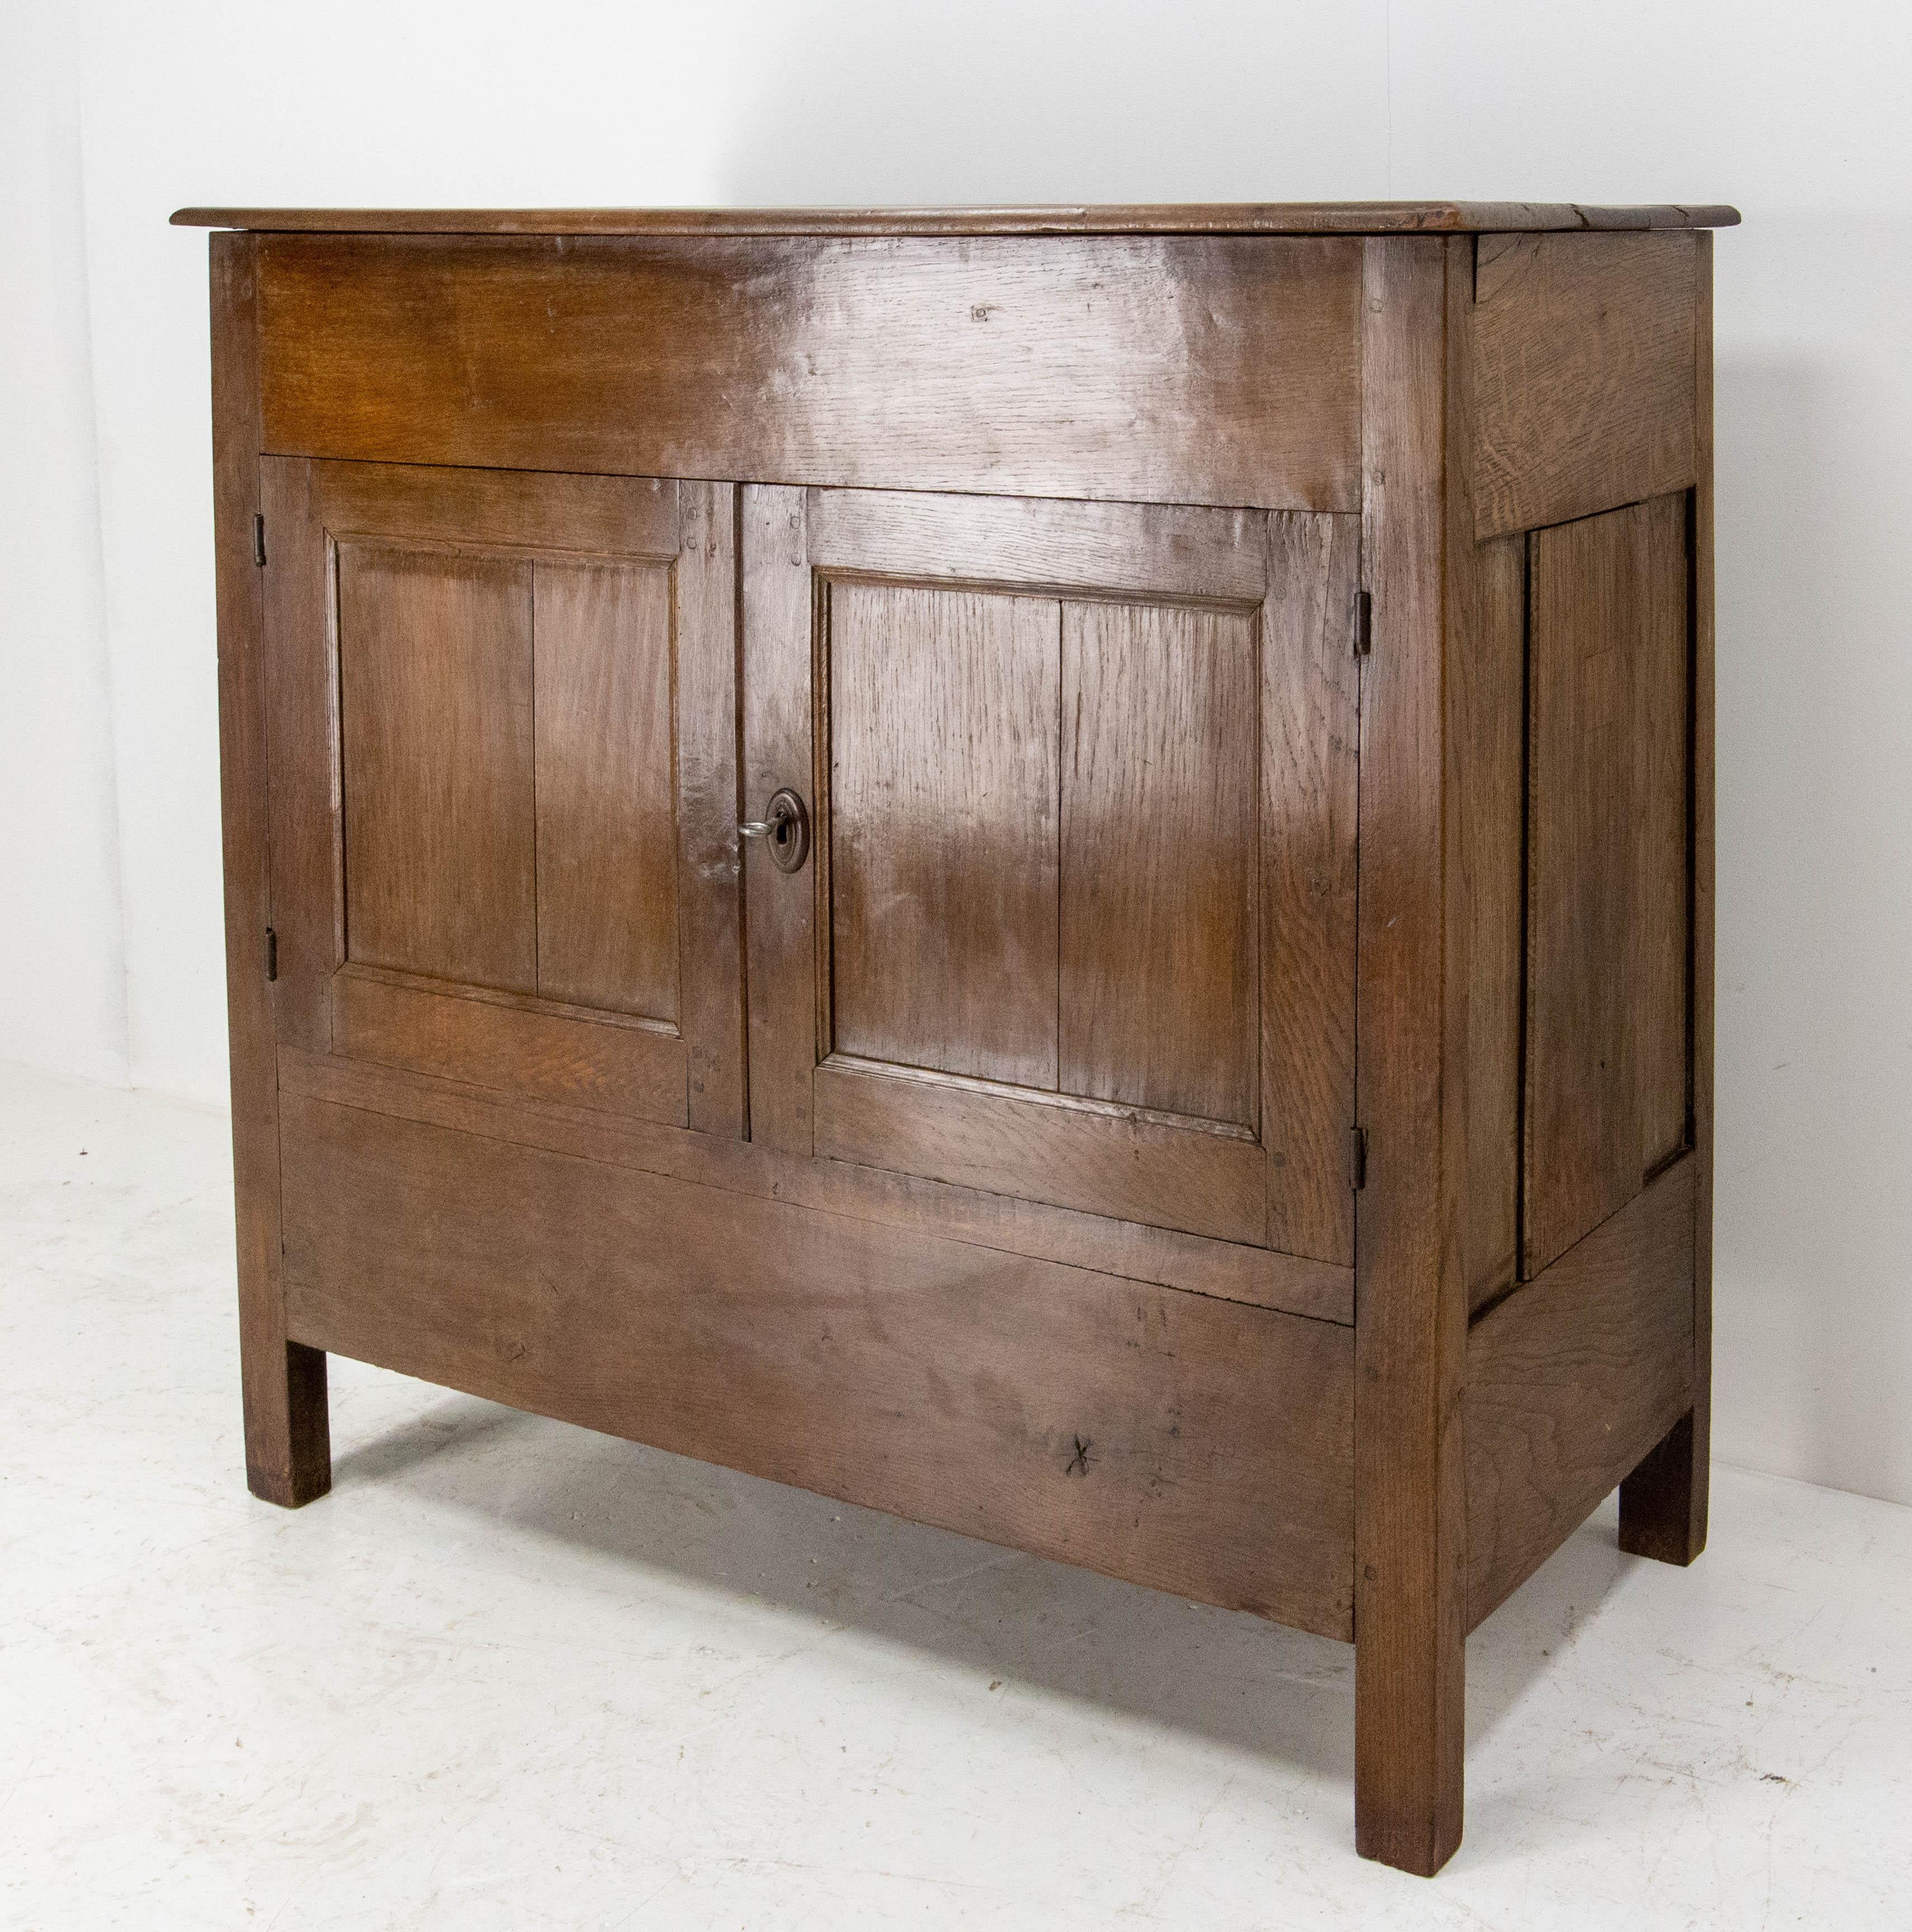 19th mid-century French cabinet buffet
Oak
The top of this buffet was used to separate bran from flour and the cabinet to store the bread.
In good condition 

Shipping:
L 125 P65 H 114.5 75 kg.